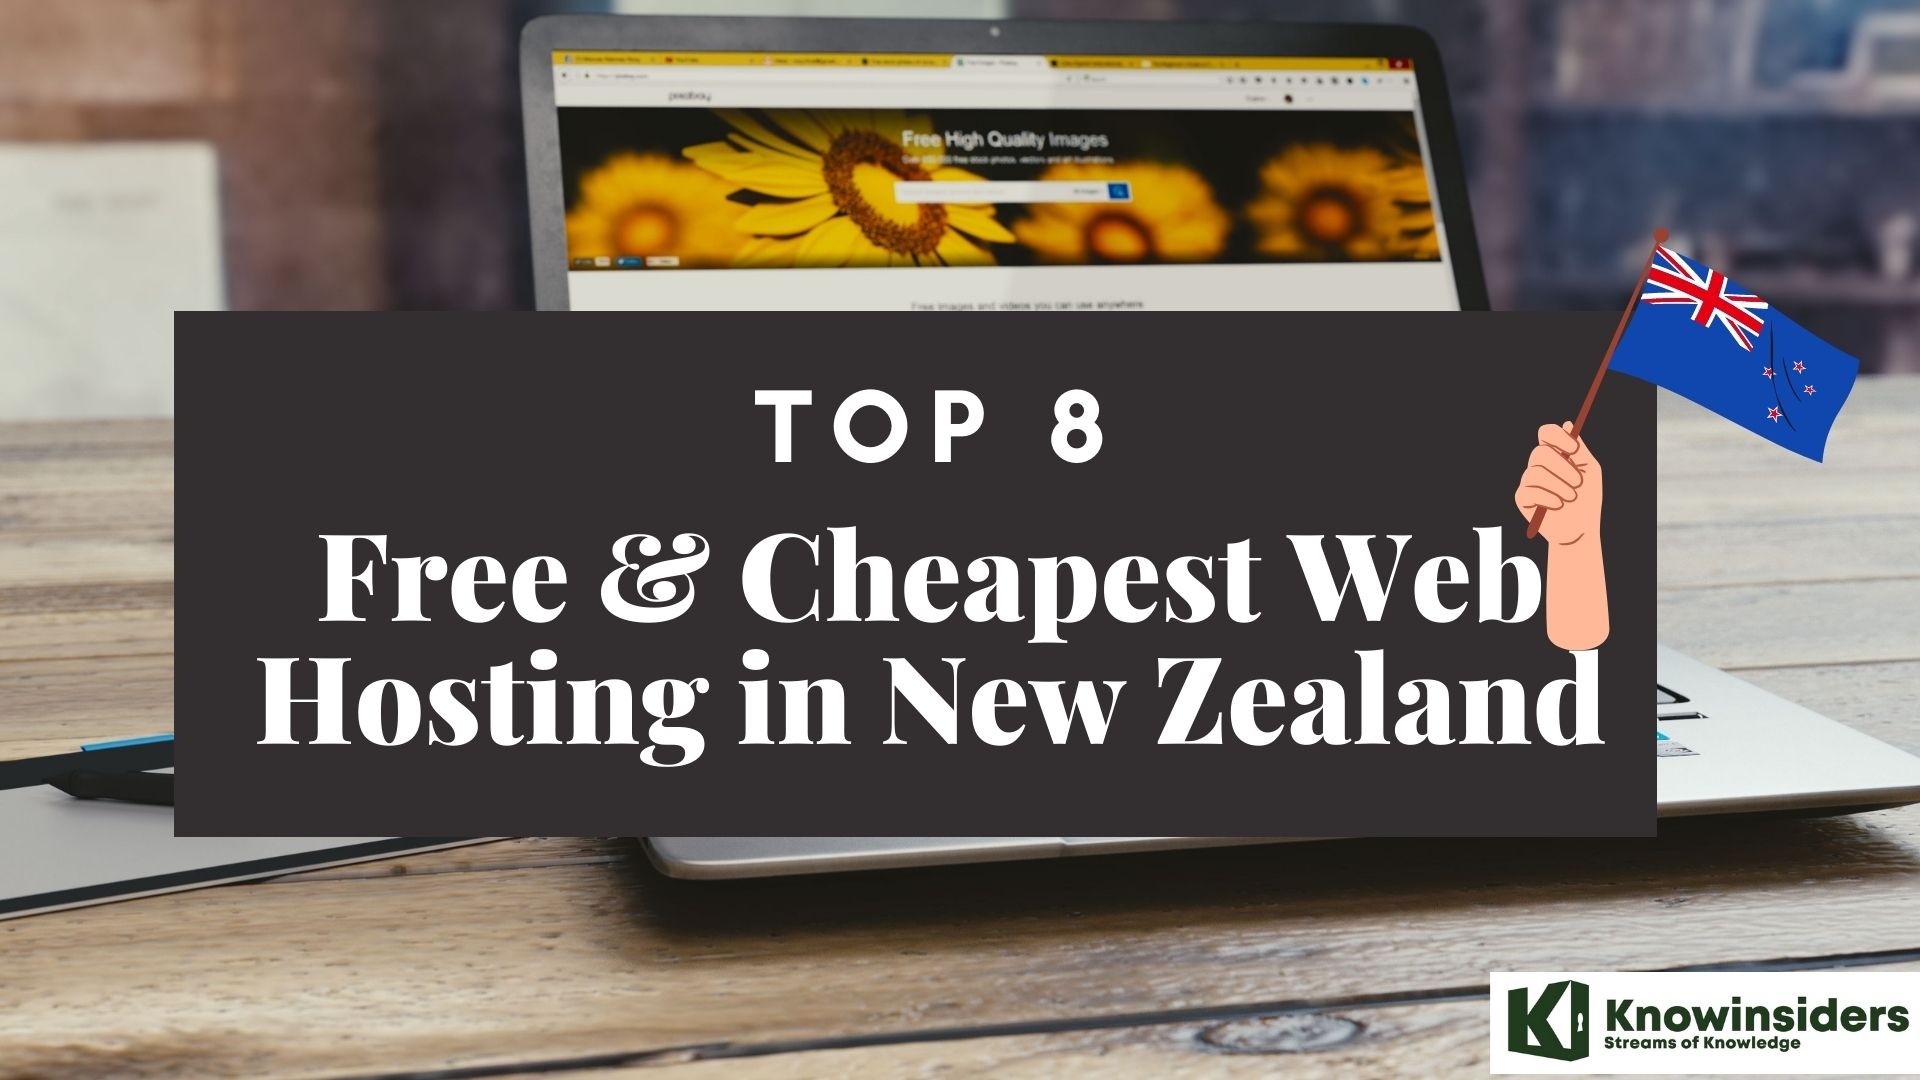 Top 8 Free & Cheapest Web Hosting Providers In New Zealand